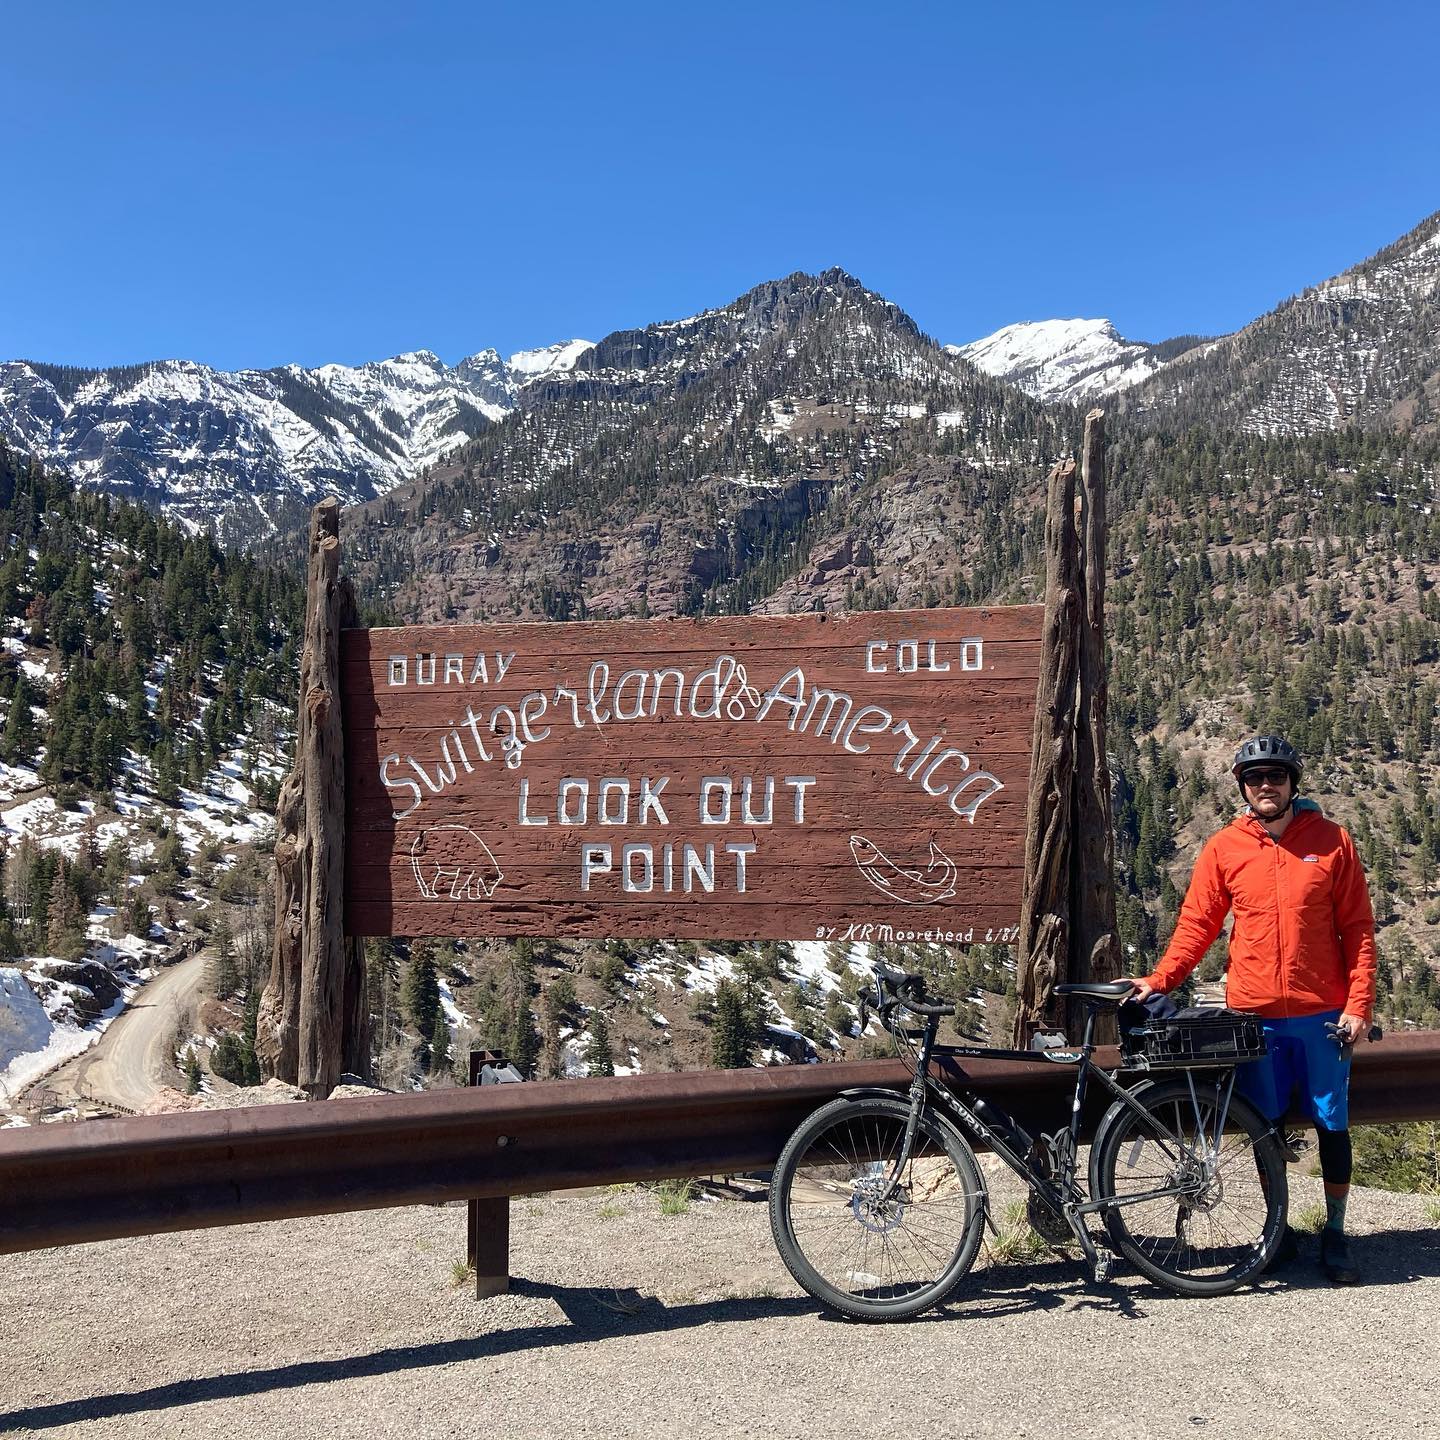 Jesse Pine rides the length of the West Coast of the US to raise awareness and funds for ShelterBox